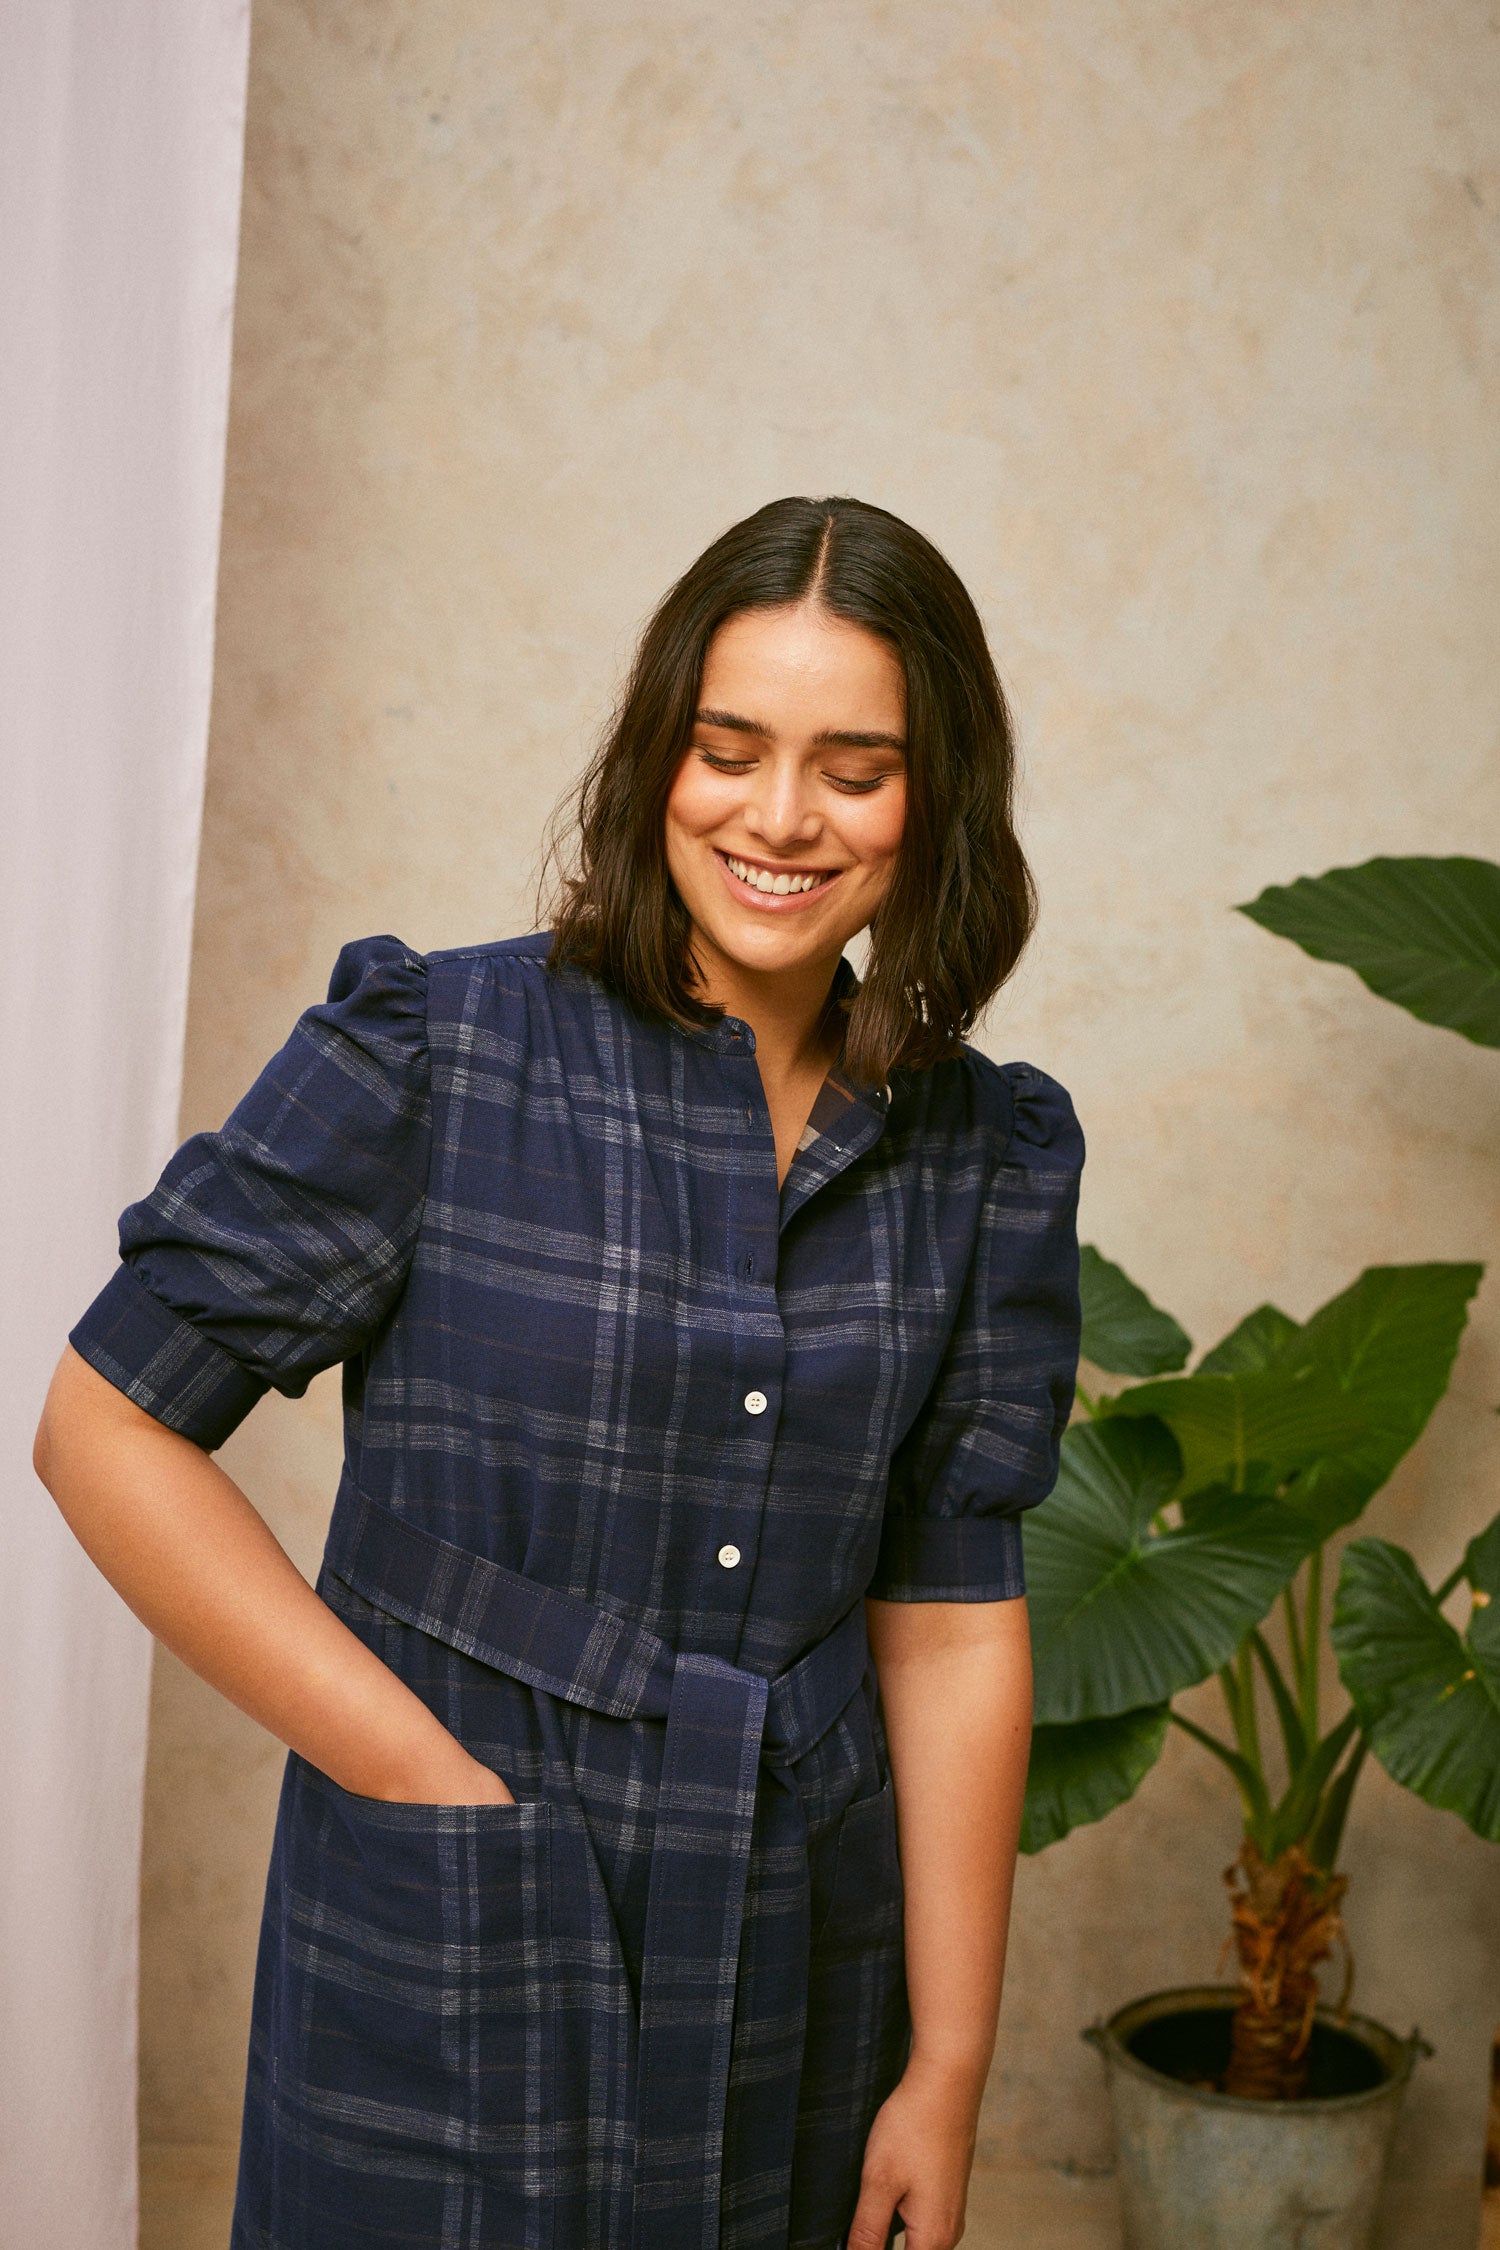 Close up crop of model wearing Saywood's Rosa navy check shirtdress, with belt loosely tied round the waist. The model is smiling and a plant and drop of pink fabric can be seen in the background.